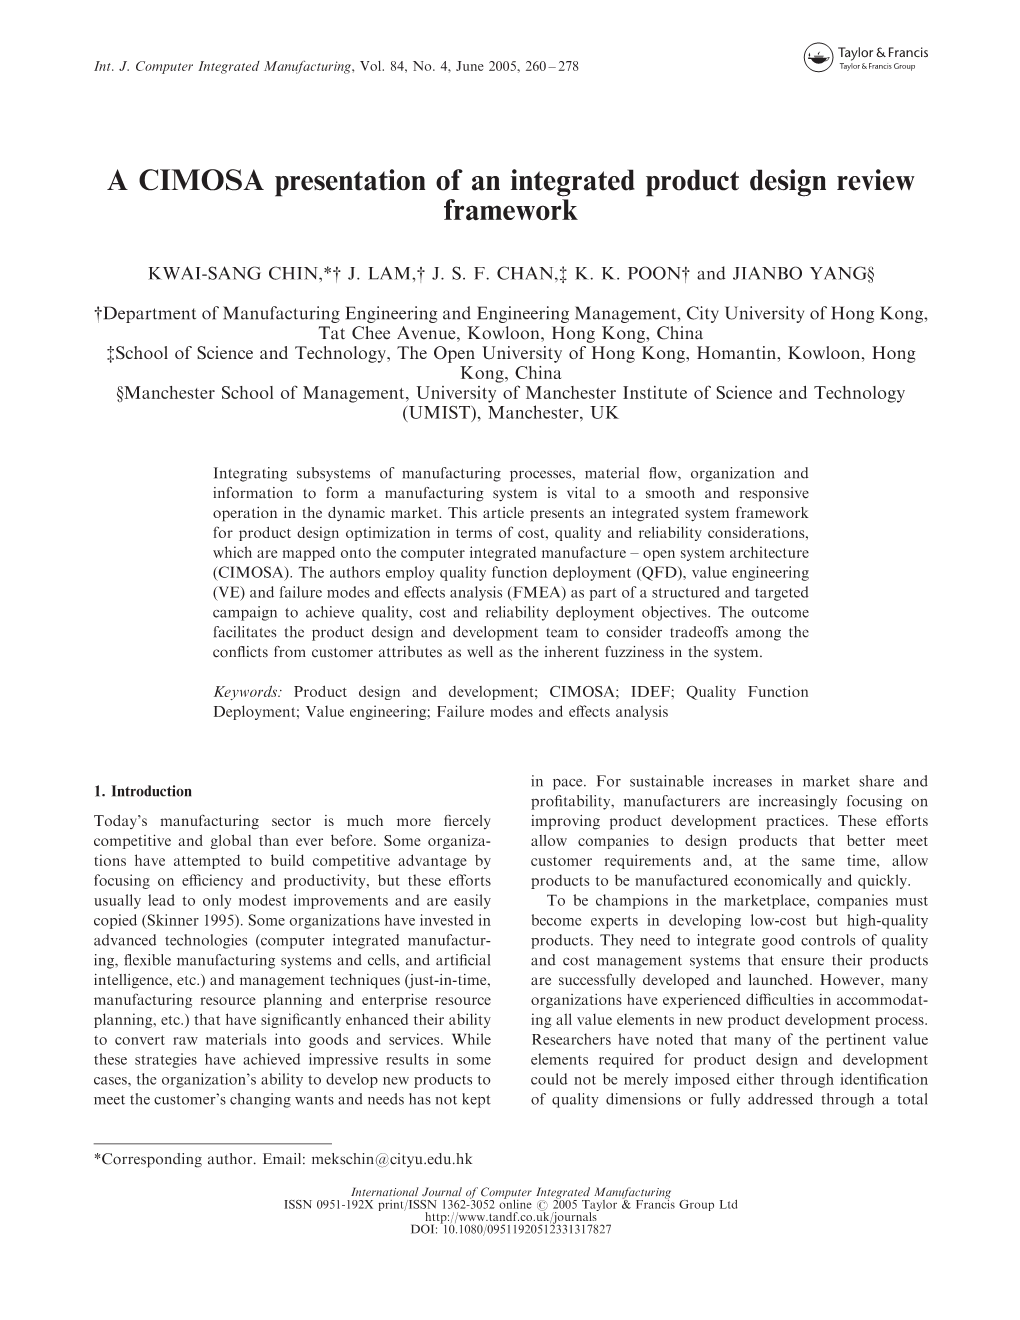 A CIMOSA Presentation of an Integrated Product Design Review Framework